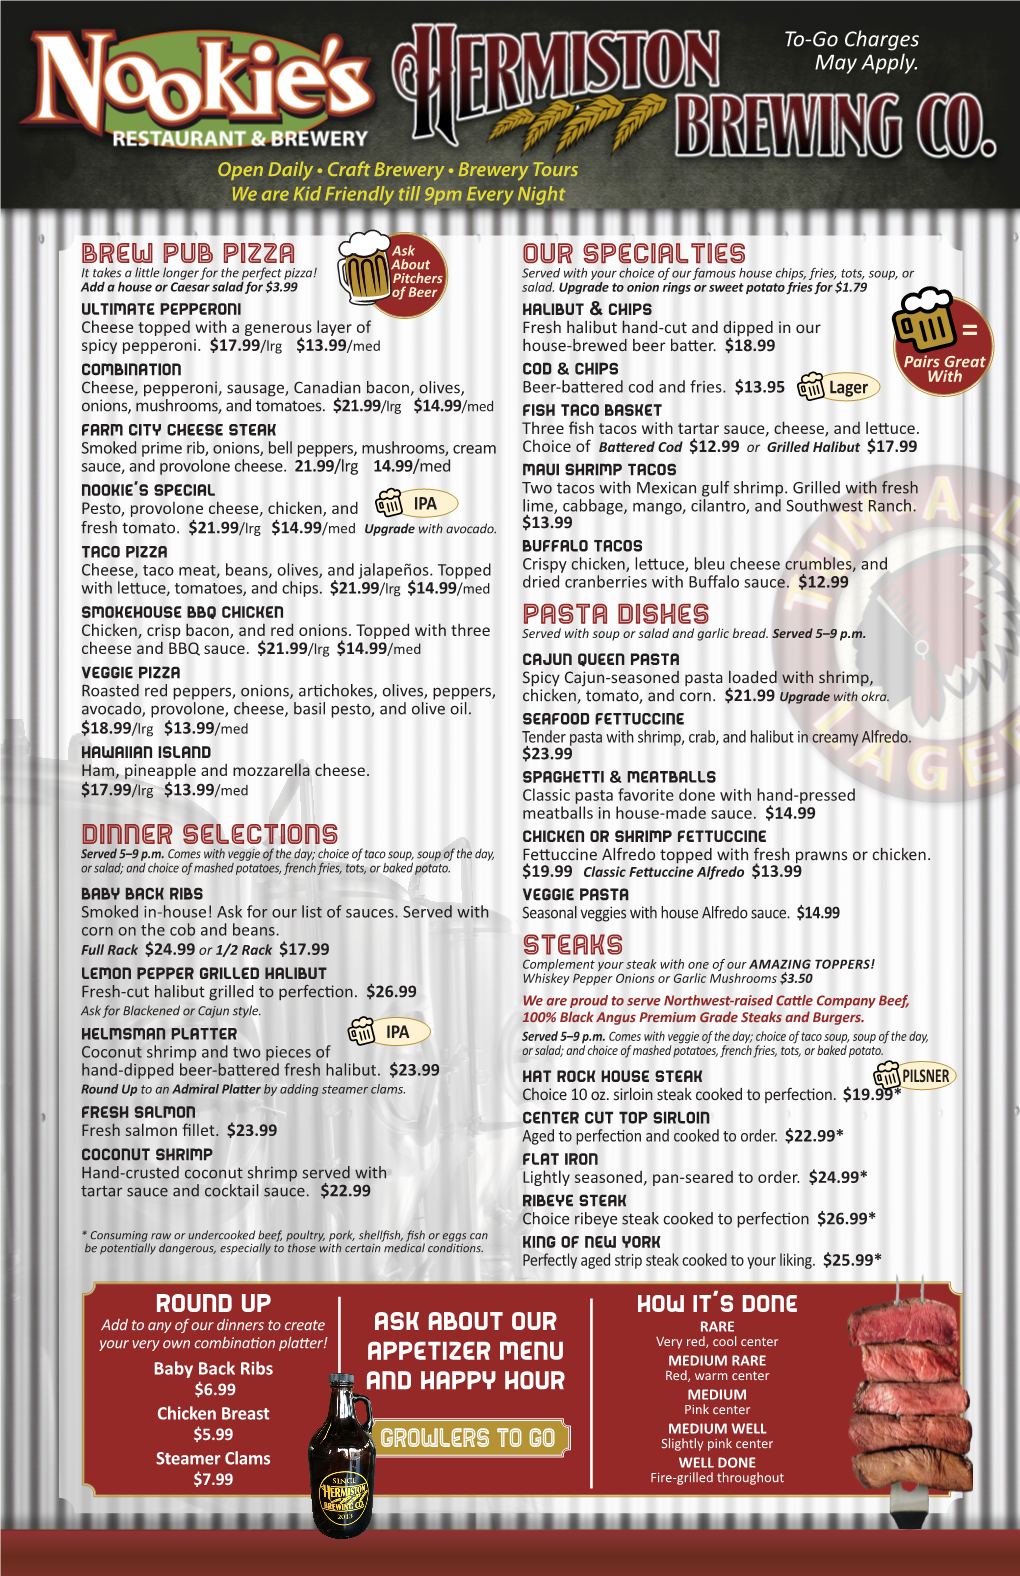 Brew Pub PIZZA Dinner Selections Our Specialties PASTA Dishes Steaks